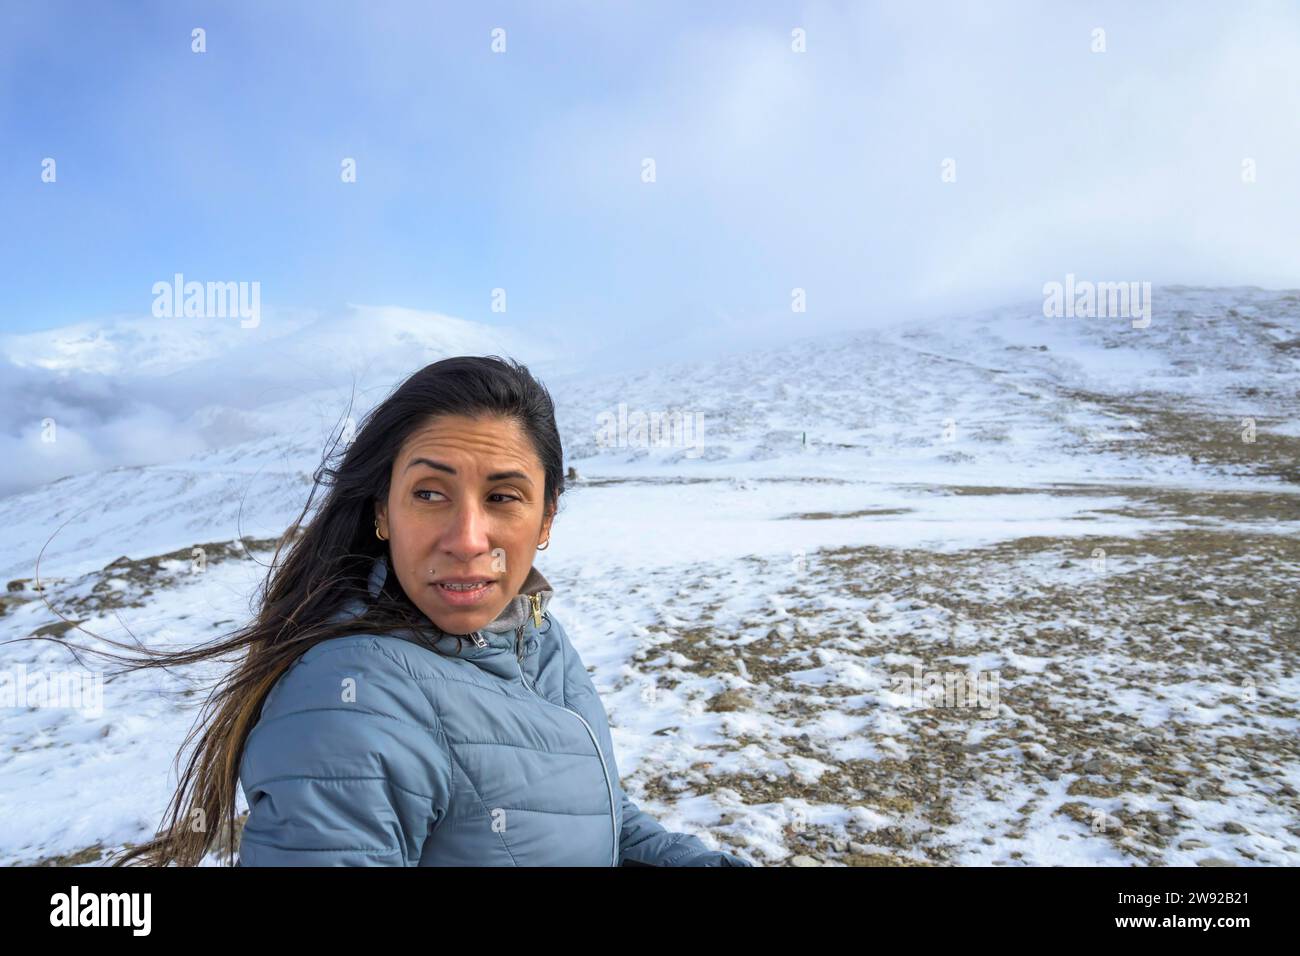 Middle-aged latina woman on a snow-capped mountain in a blizzard Stock Photo